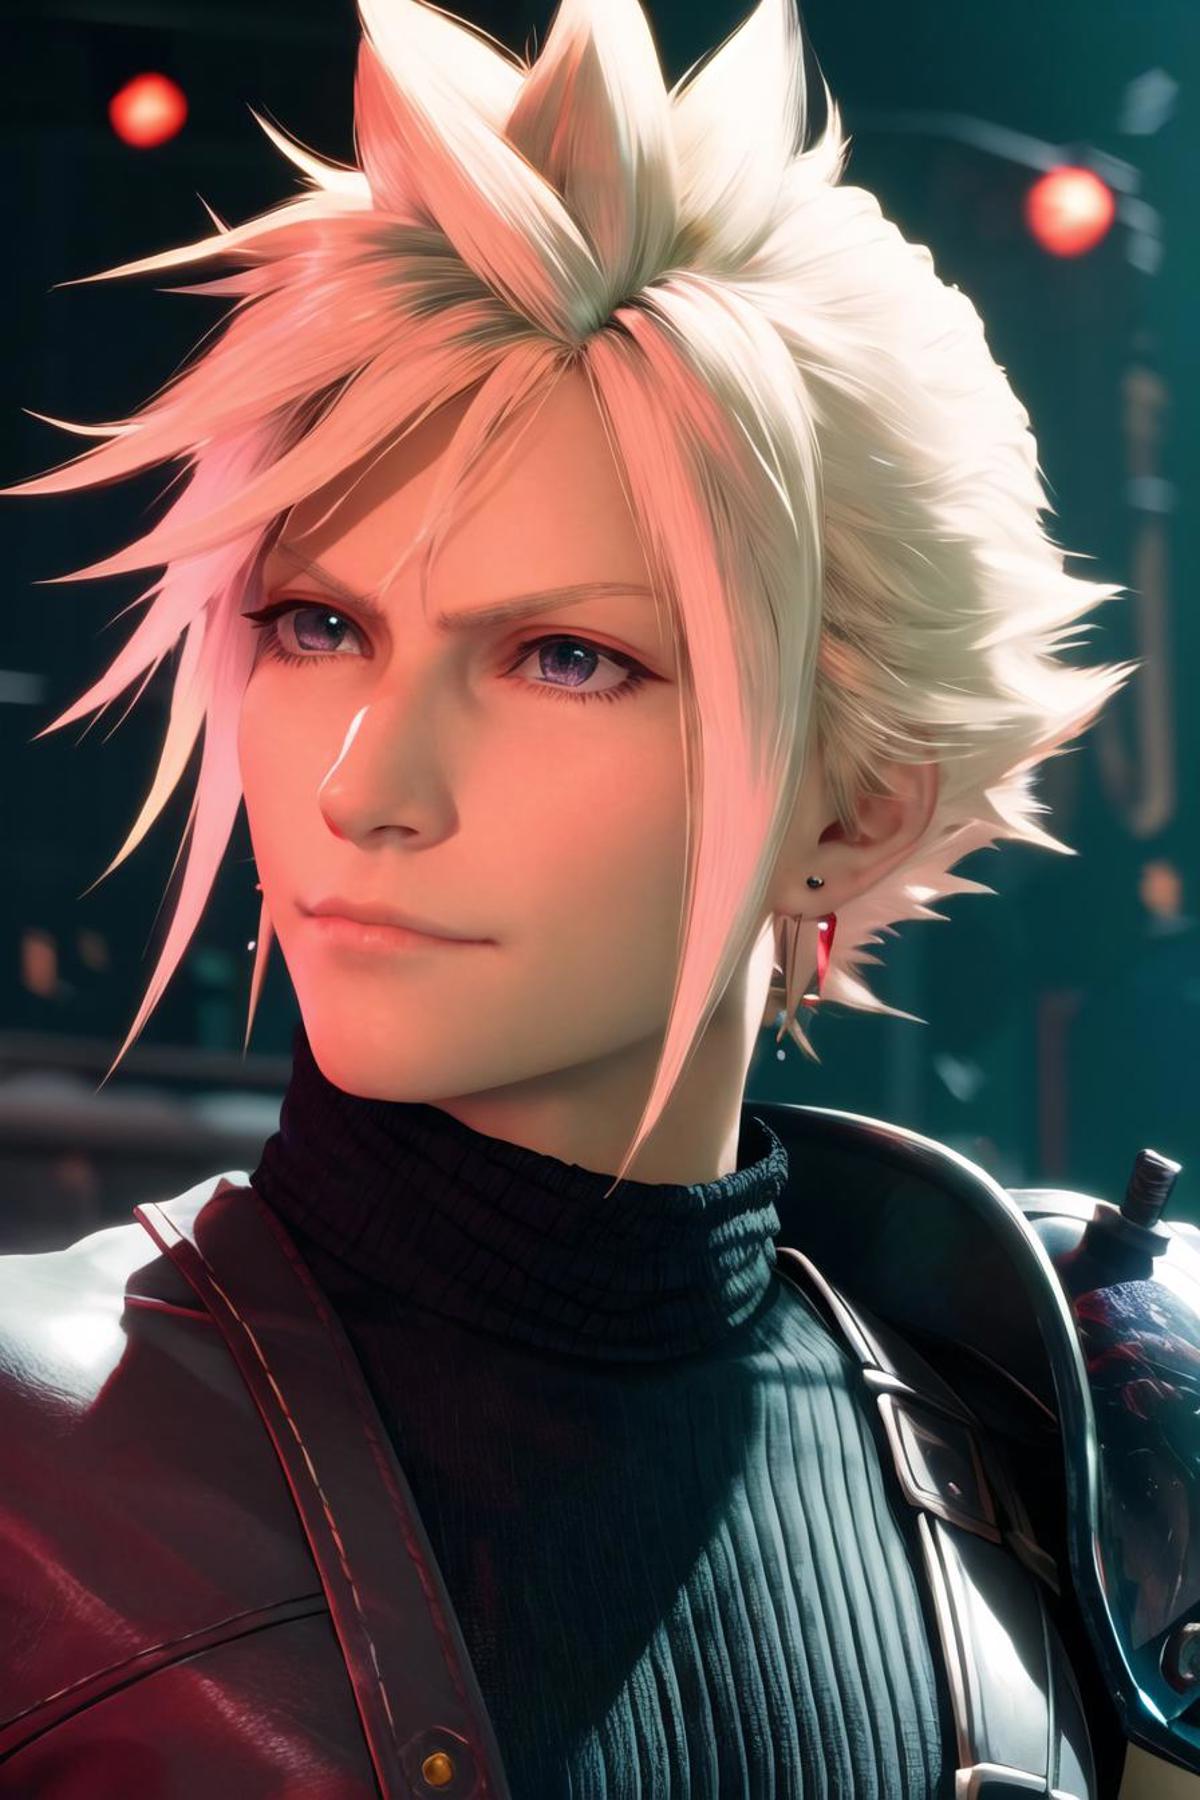 A close-up of a young male character with white hair, wearing a black top and earrings.